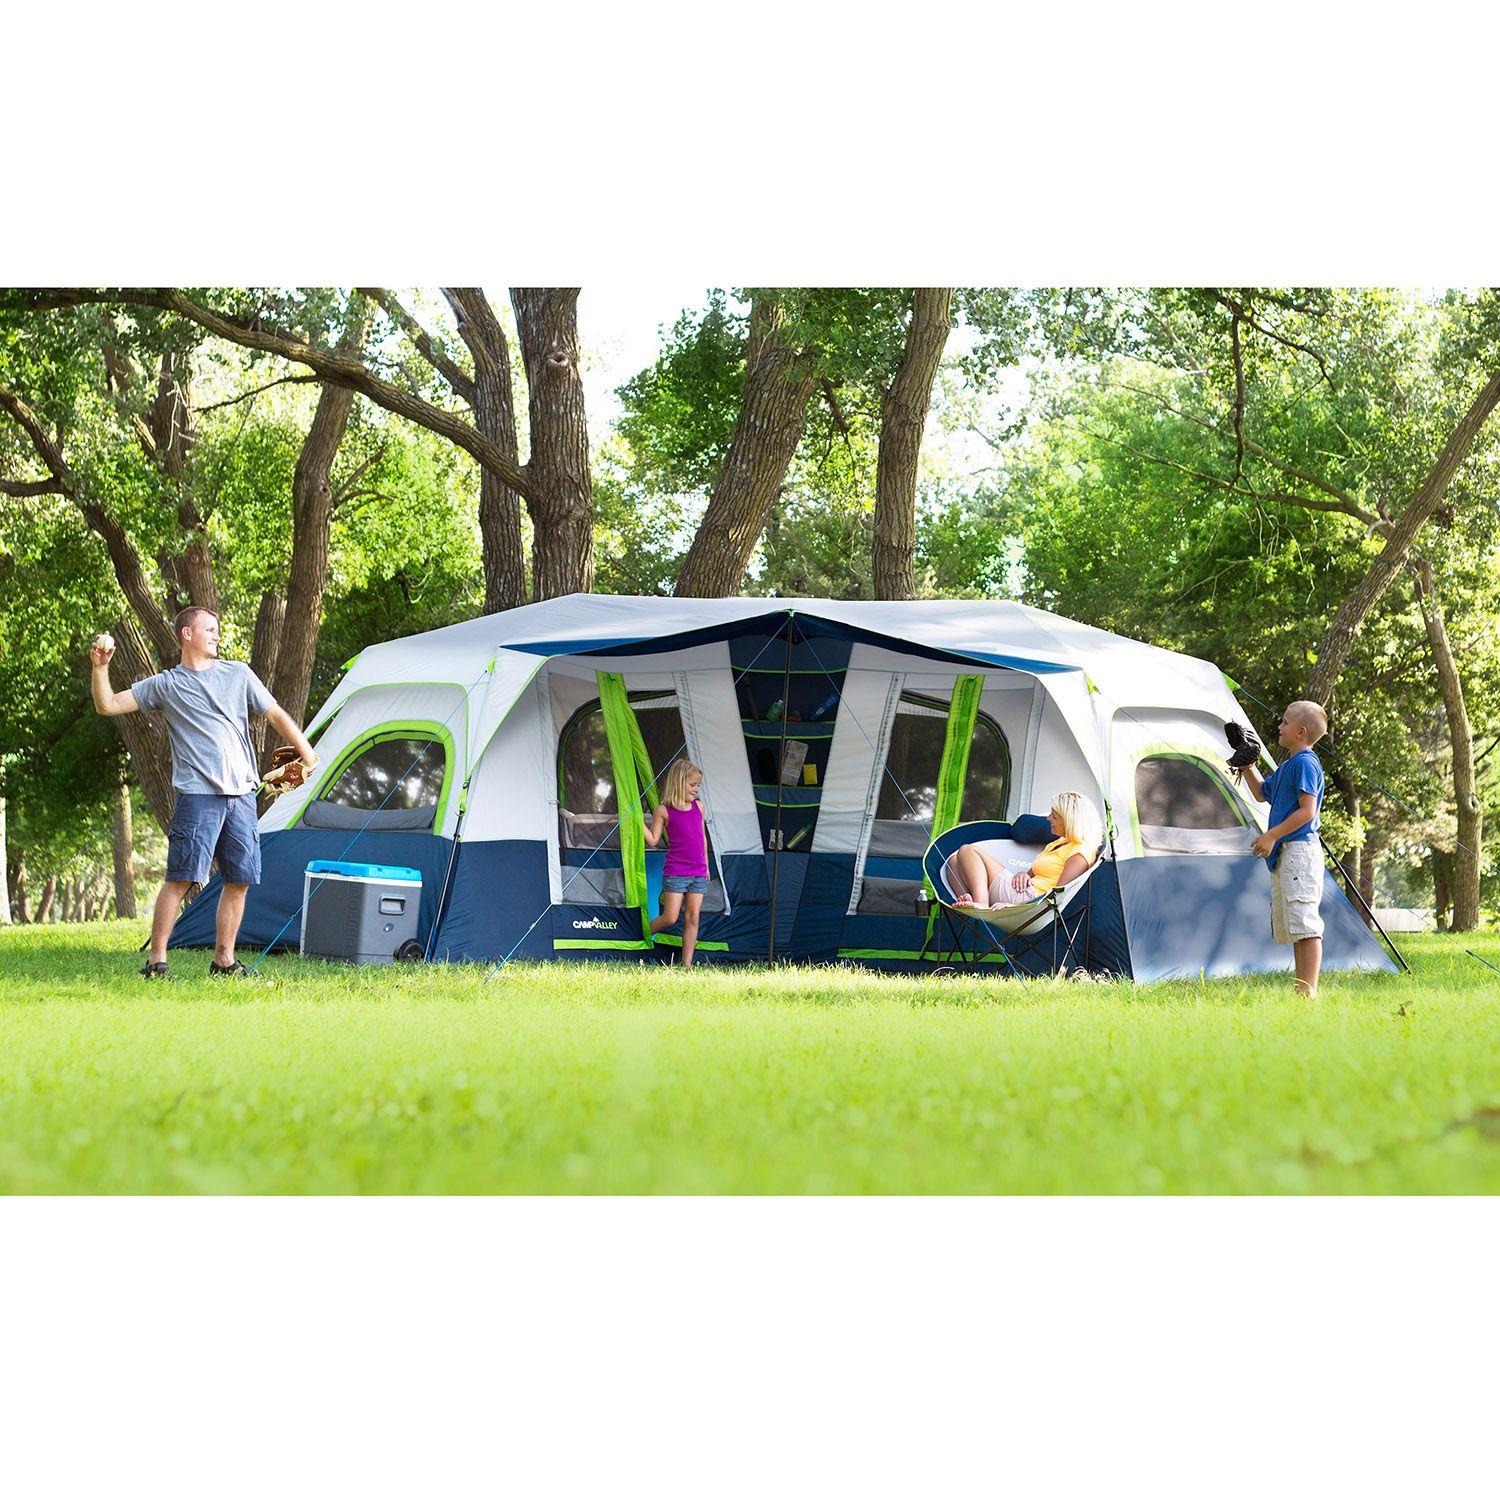 Campvalley 10-Person Instant Double Villa Cabin Tent